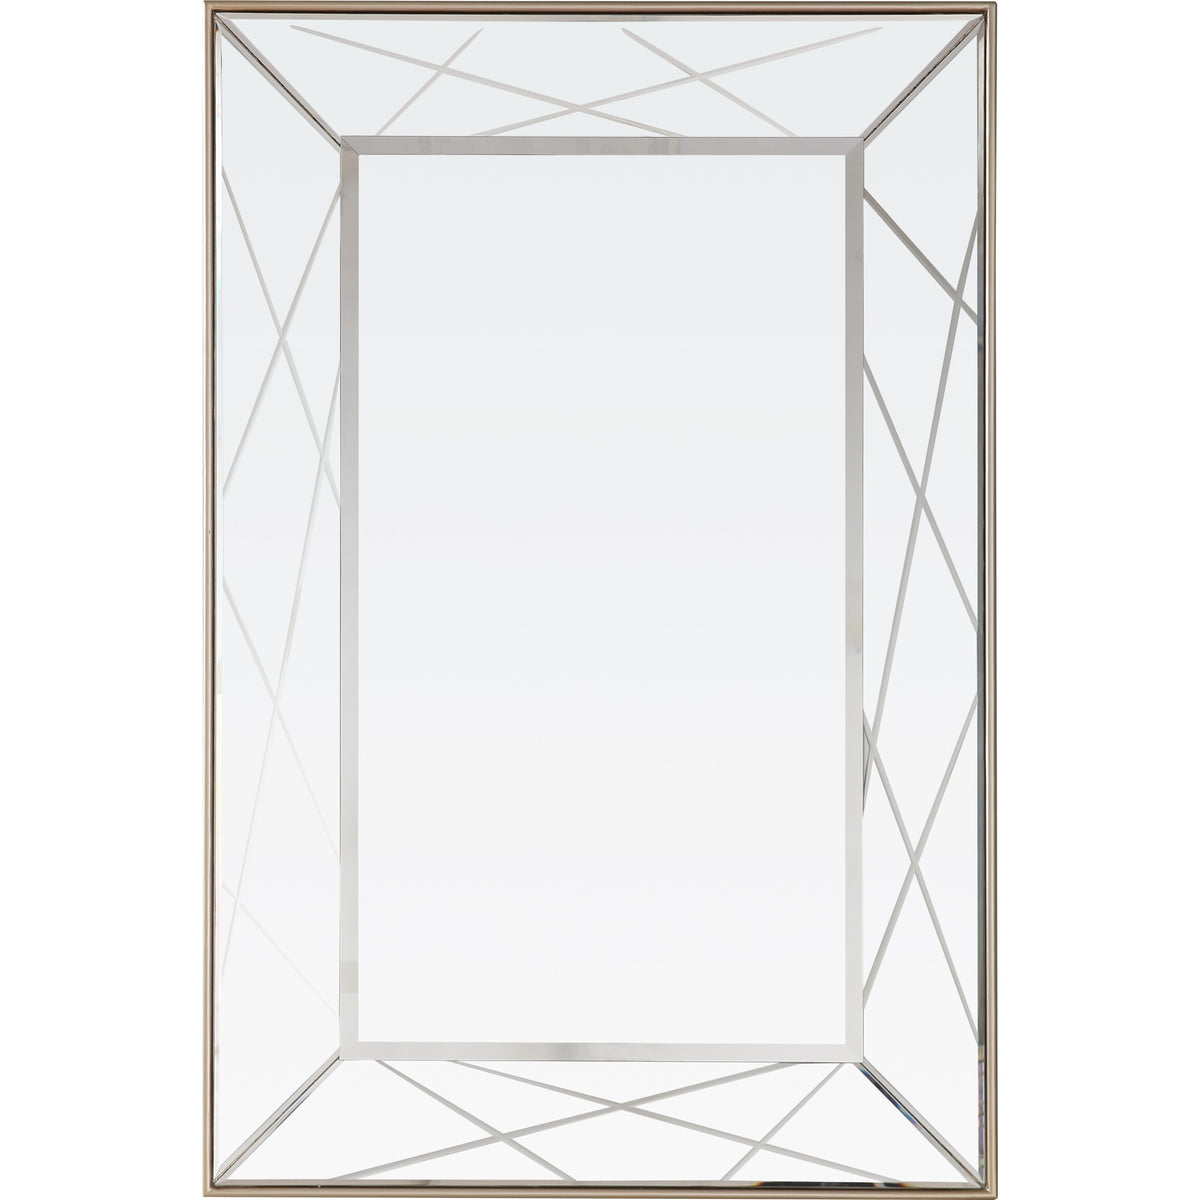 43" Painted Rectangle Accent Mirror Wall Mounted With Metal Frame